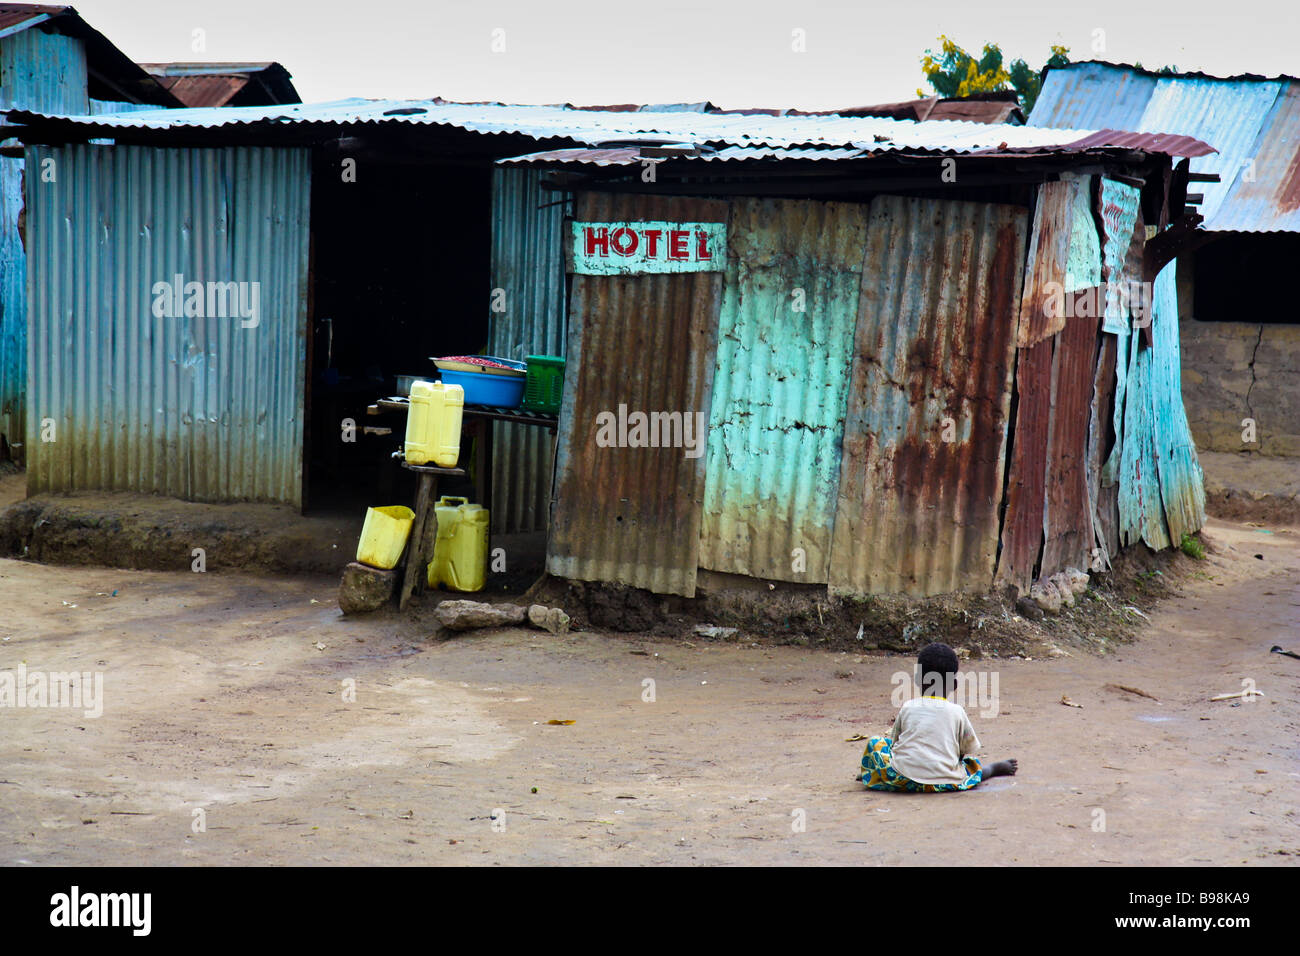 Local guest accommodations in northern Uganda Stock Photo